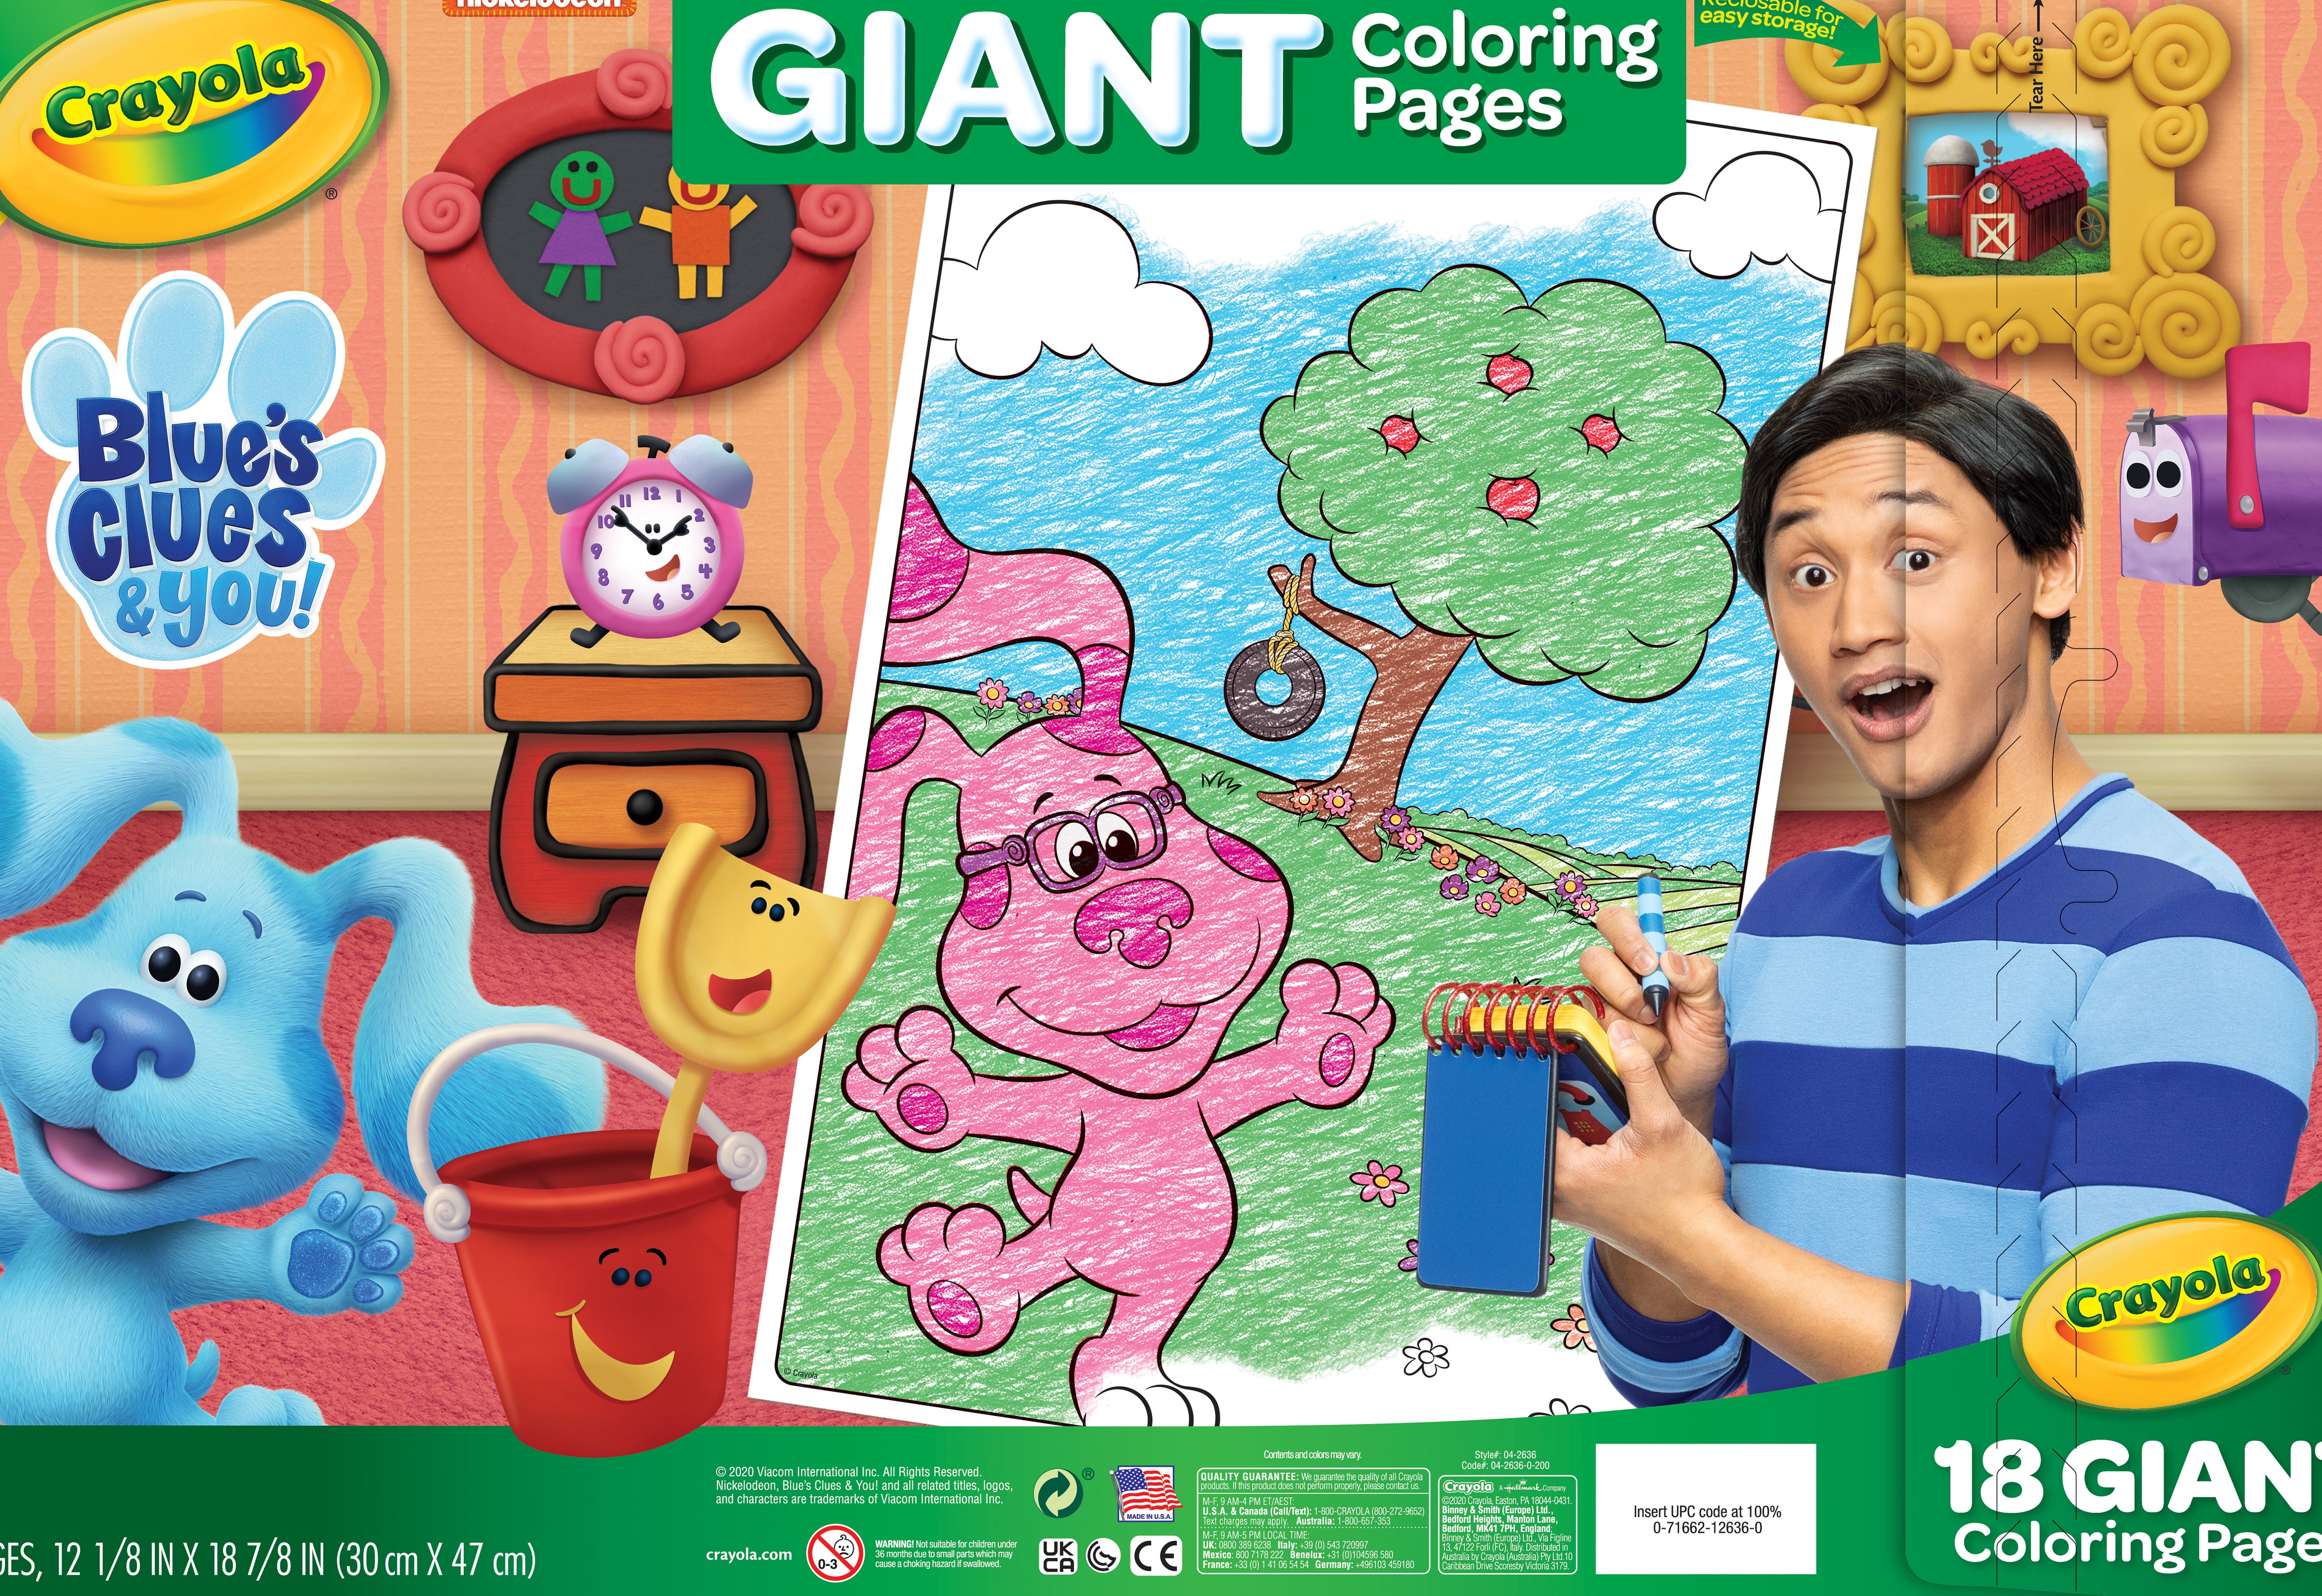 Crayola Giant Coloring Book Featuring Blue'S Clues, Beginner Child, 18